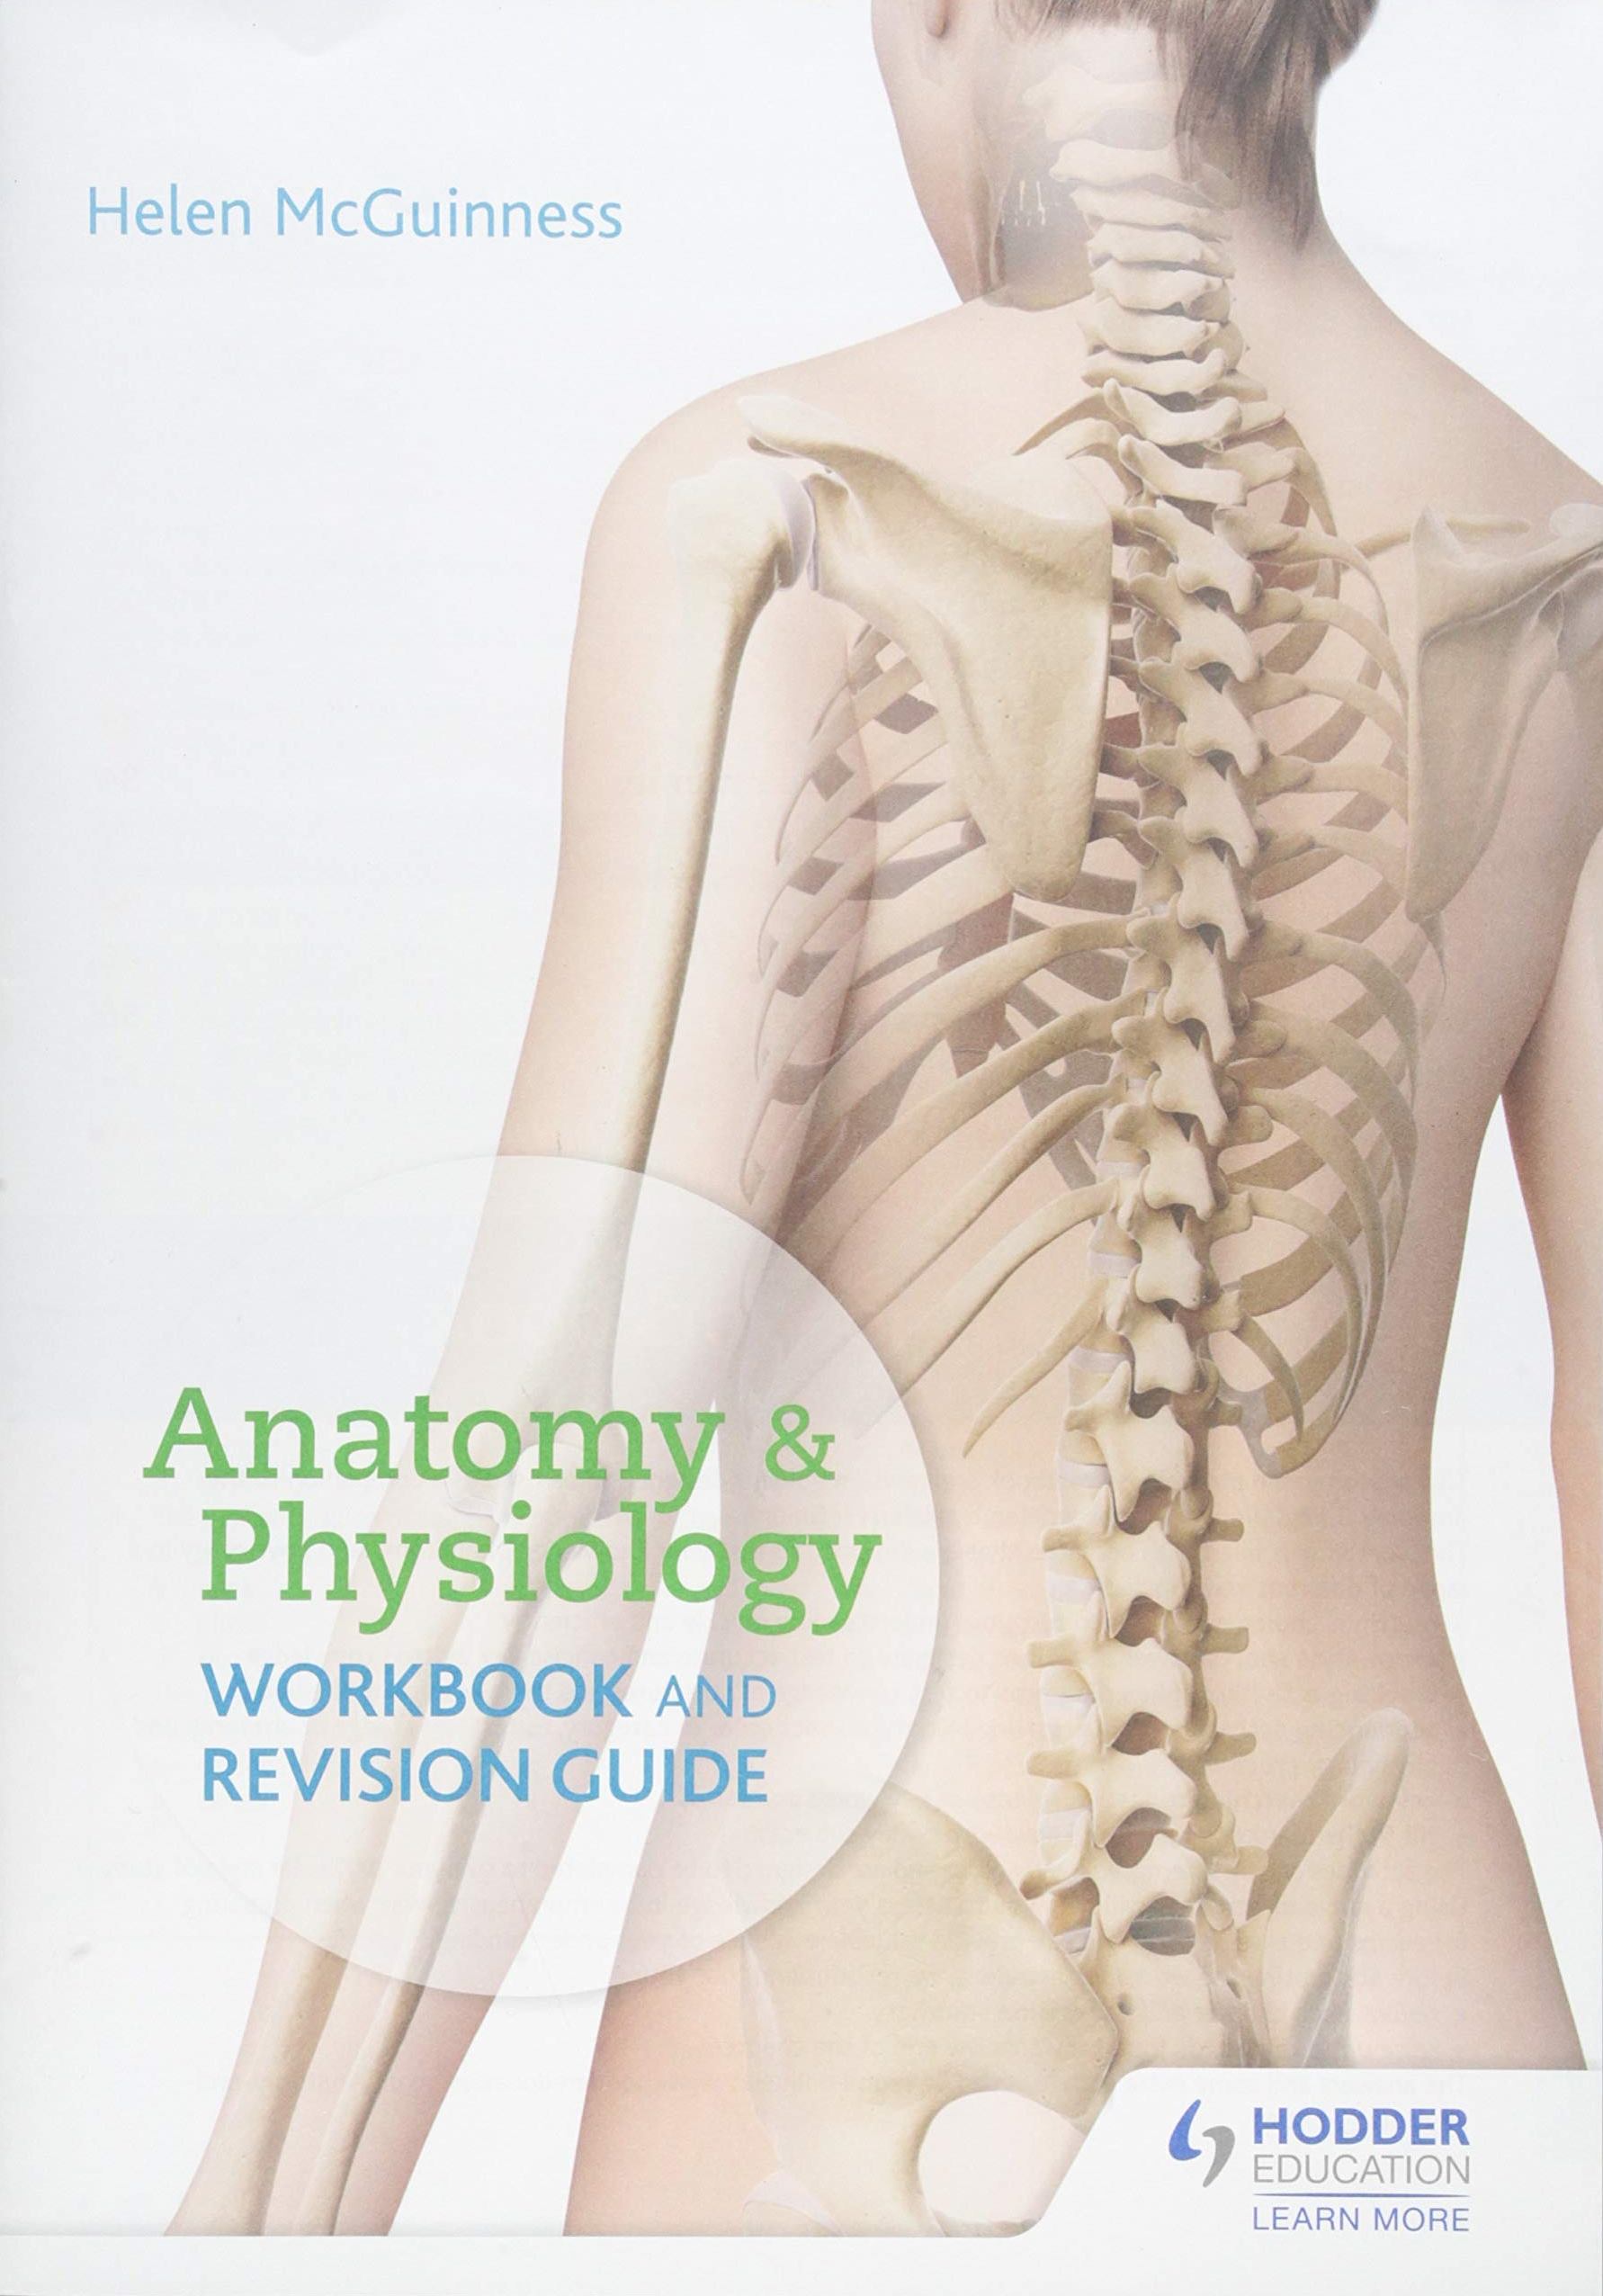 Anatomy & Physiology Workbook and Revision Guide Helen McGuinness